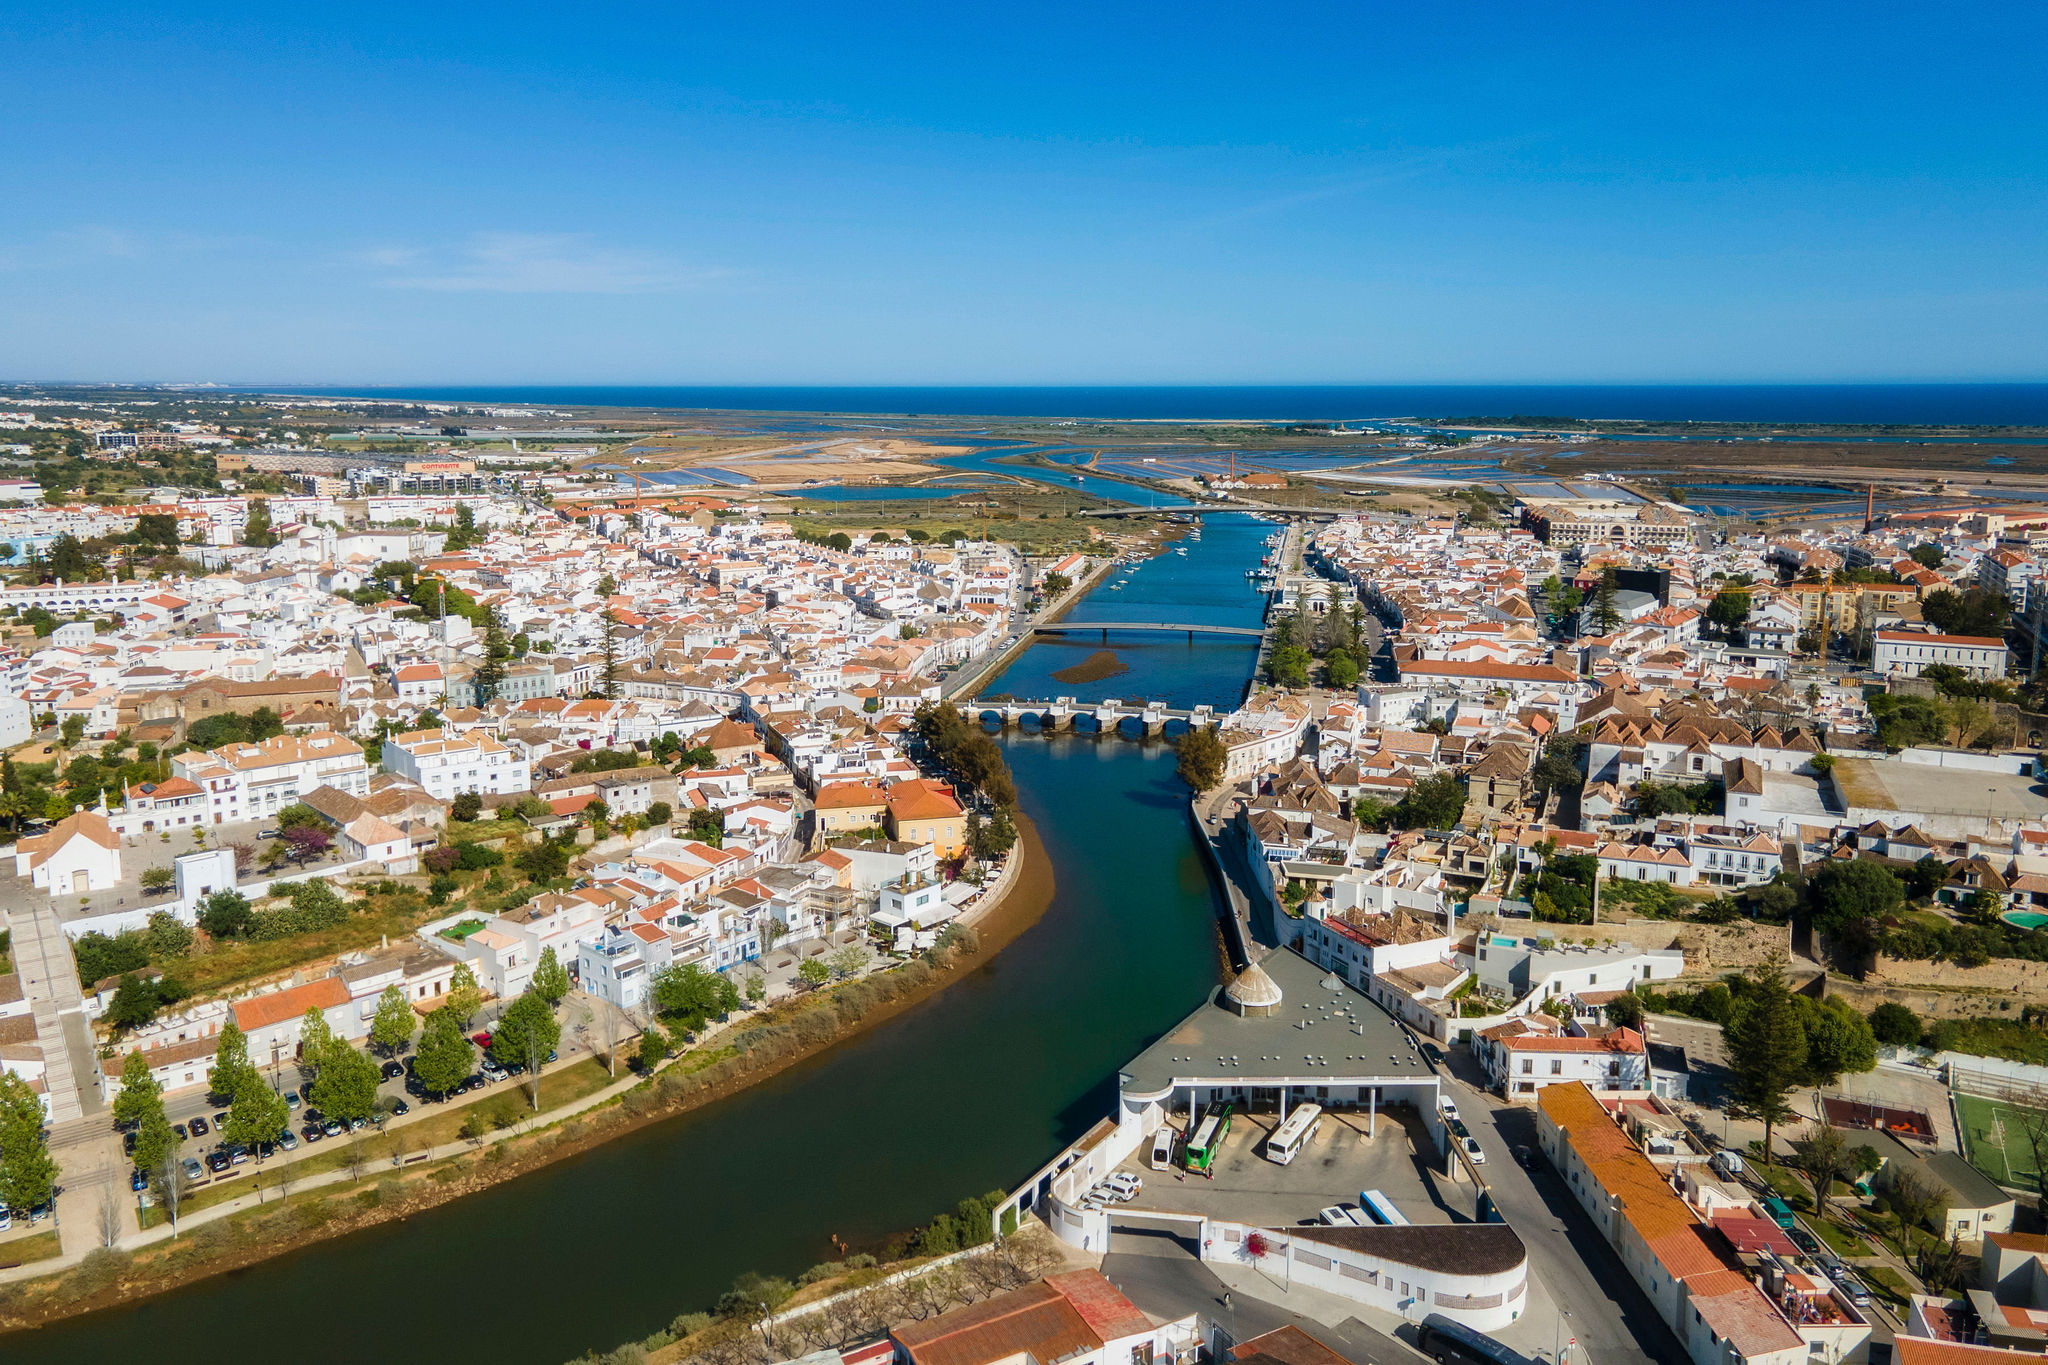 Tavira side by side with Gilão river and the sea